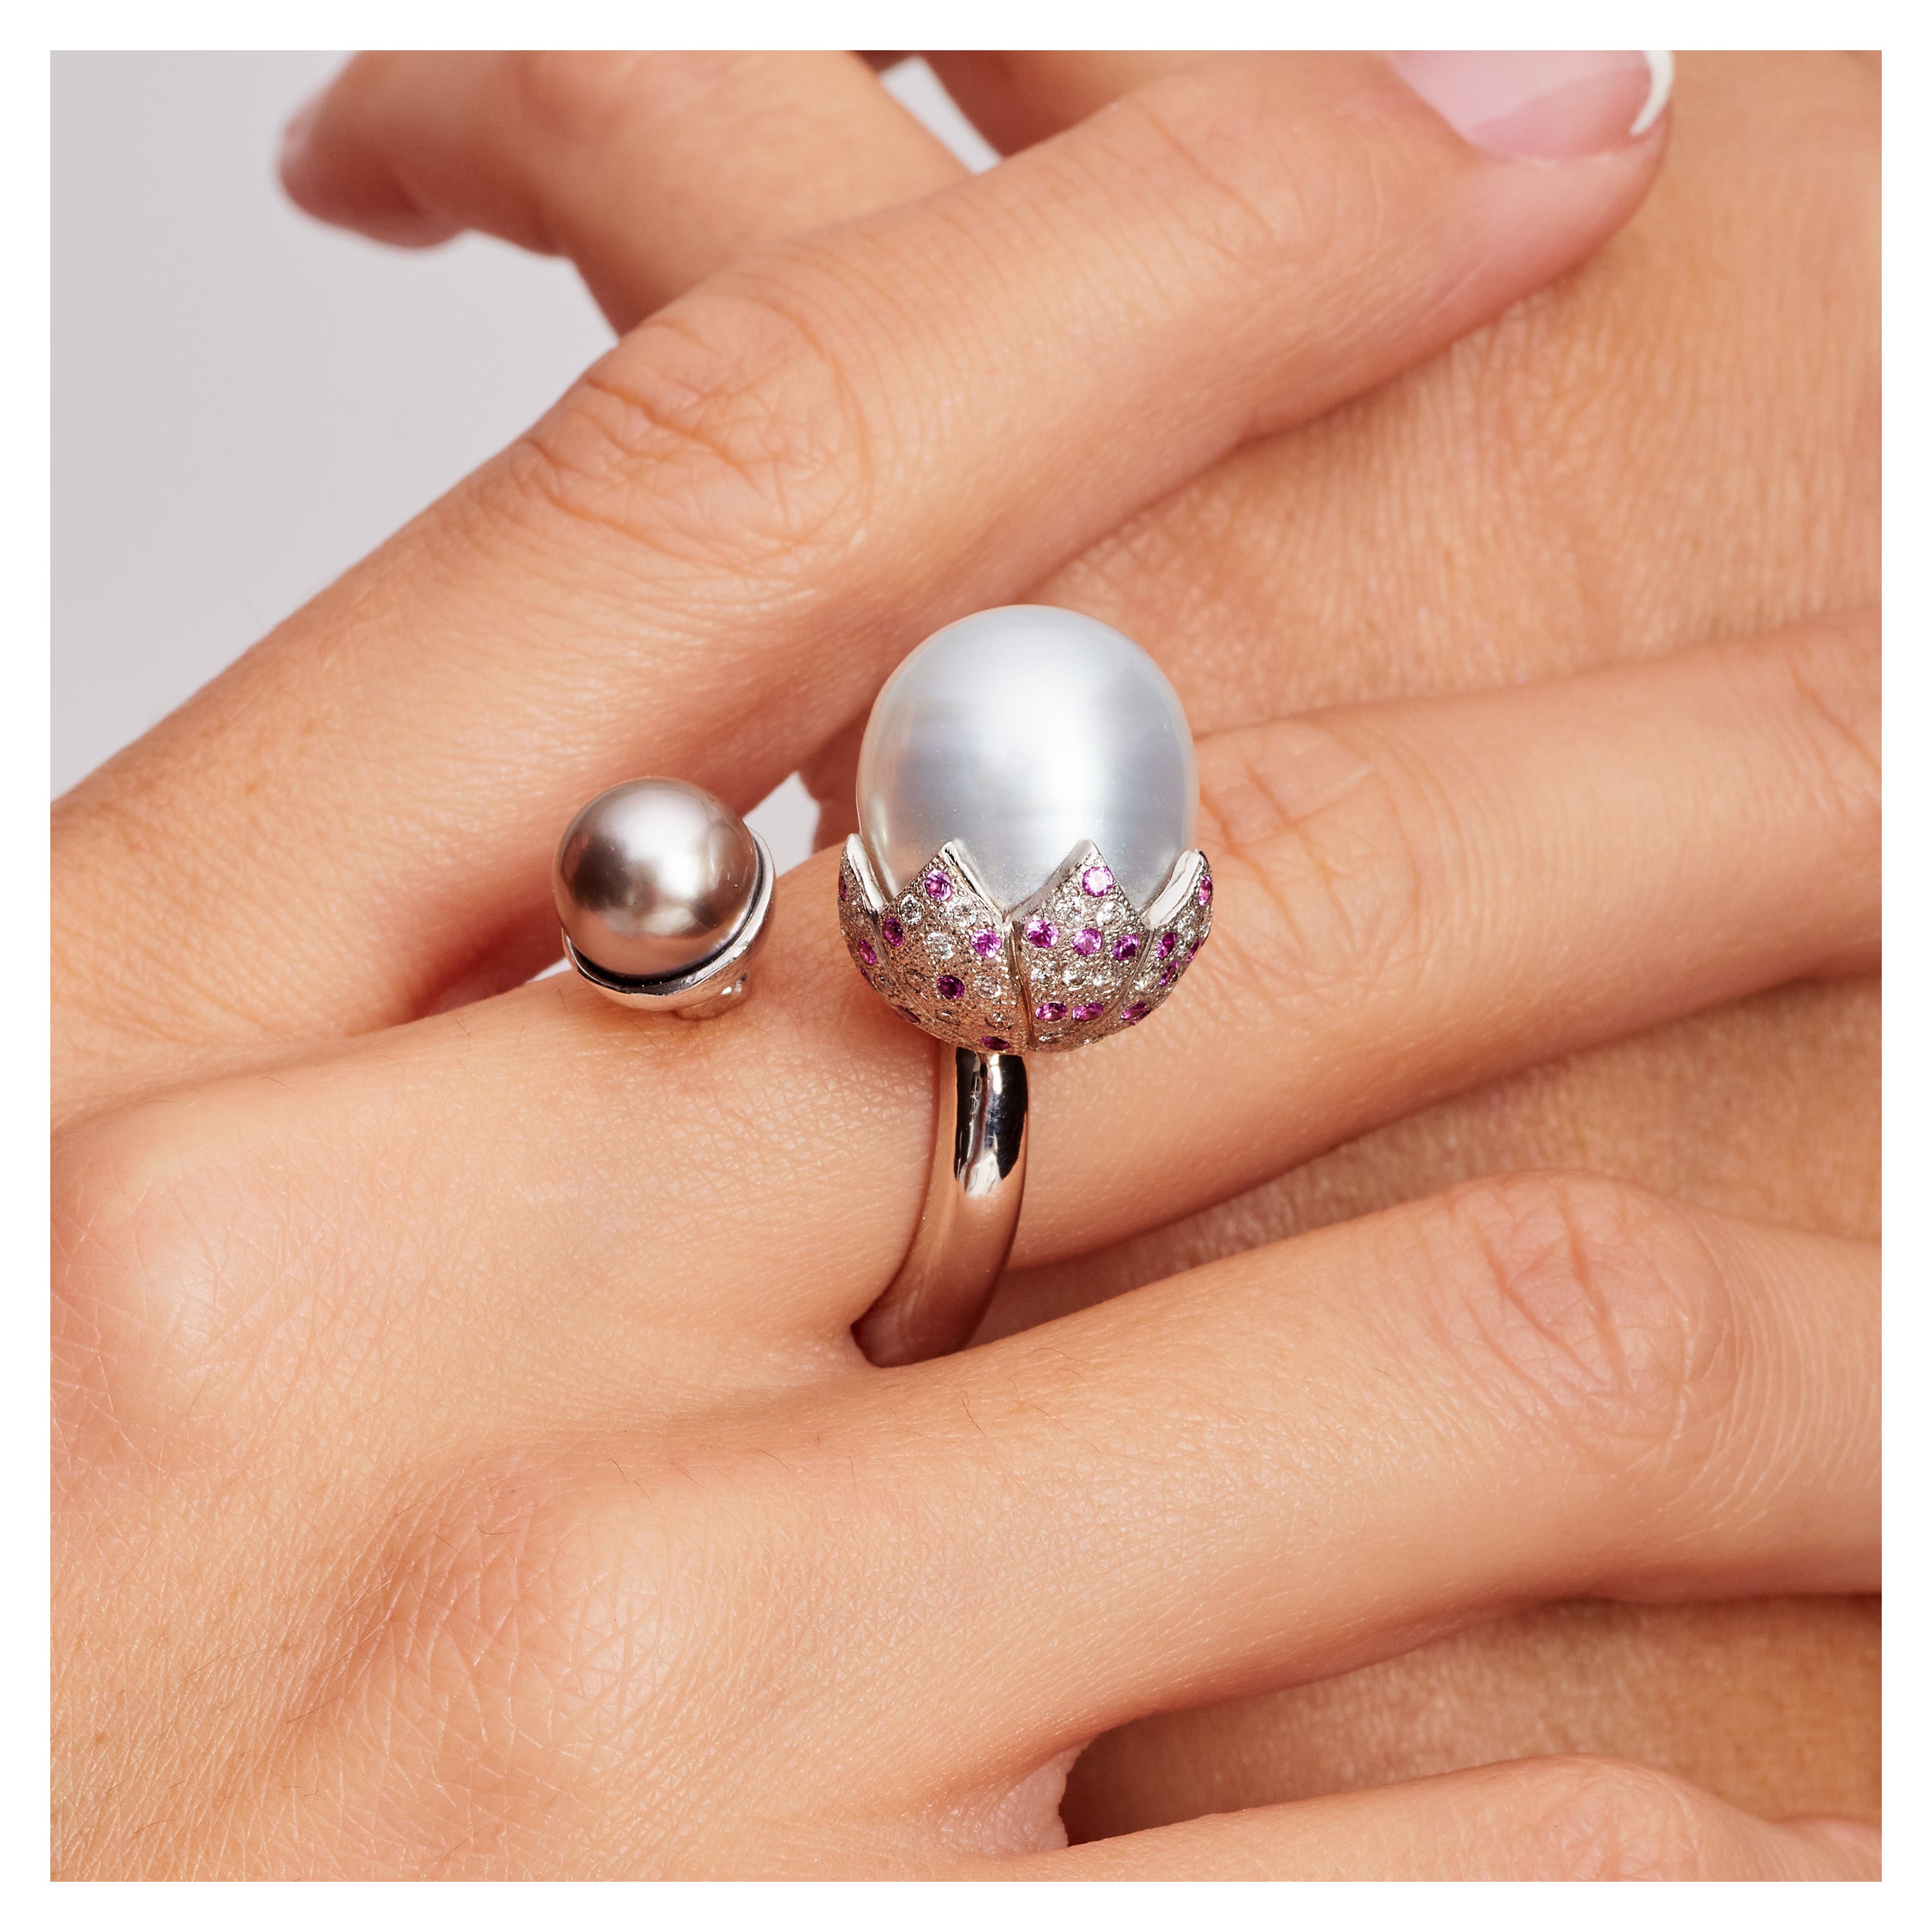 Tahitian Pearl South Sea Pearl Diamond Pink Sapphire Cocktail Ring, In Stock.

This cocktail ring was hand-created with 18-karat white gold. It features an 8.5-millimeter cultured Tahitian Pearl and a 13.44-millimeter cultured South Sea Pearl. The